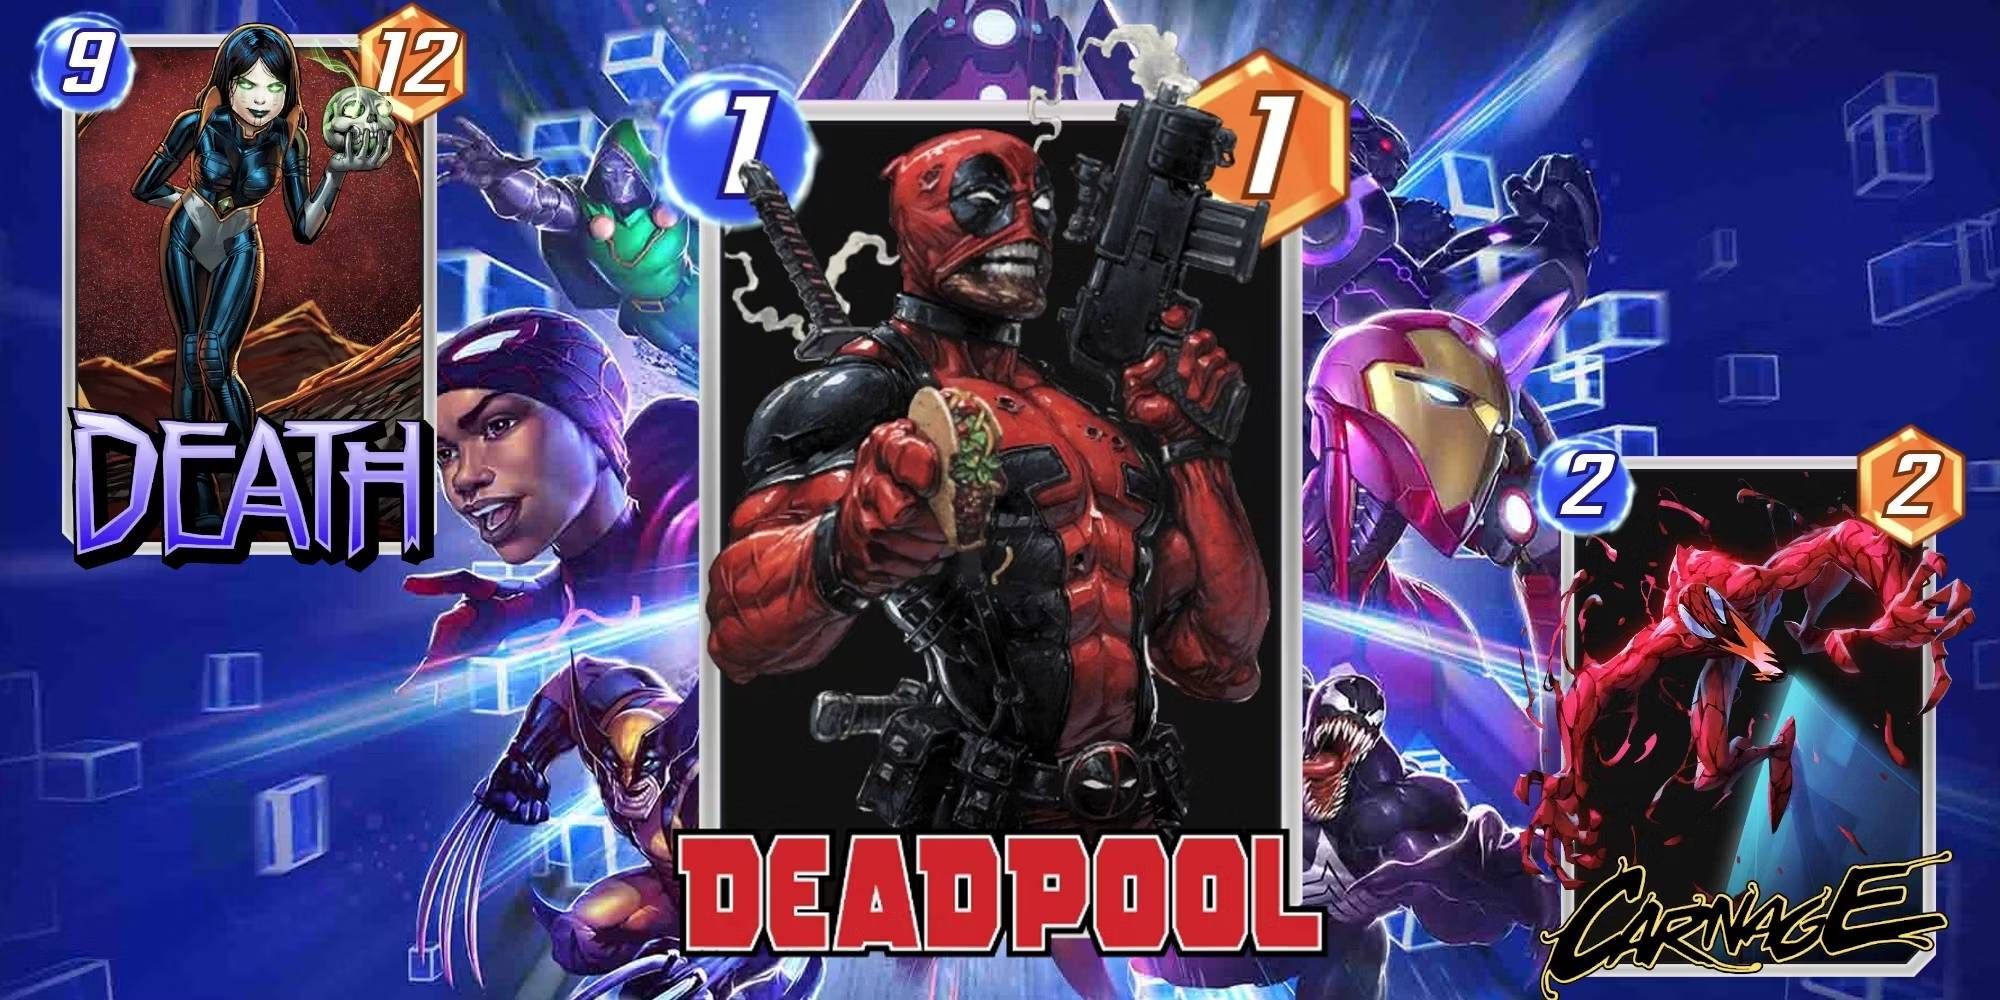 Marvel Snap Deadpool, Death, and Carnage Variant Cards with Power and Energy Displayed with Main Promotional Image in the Background